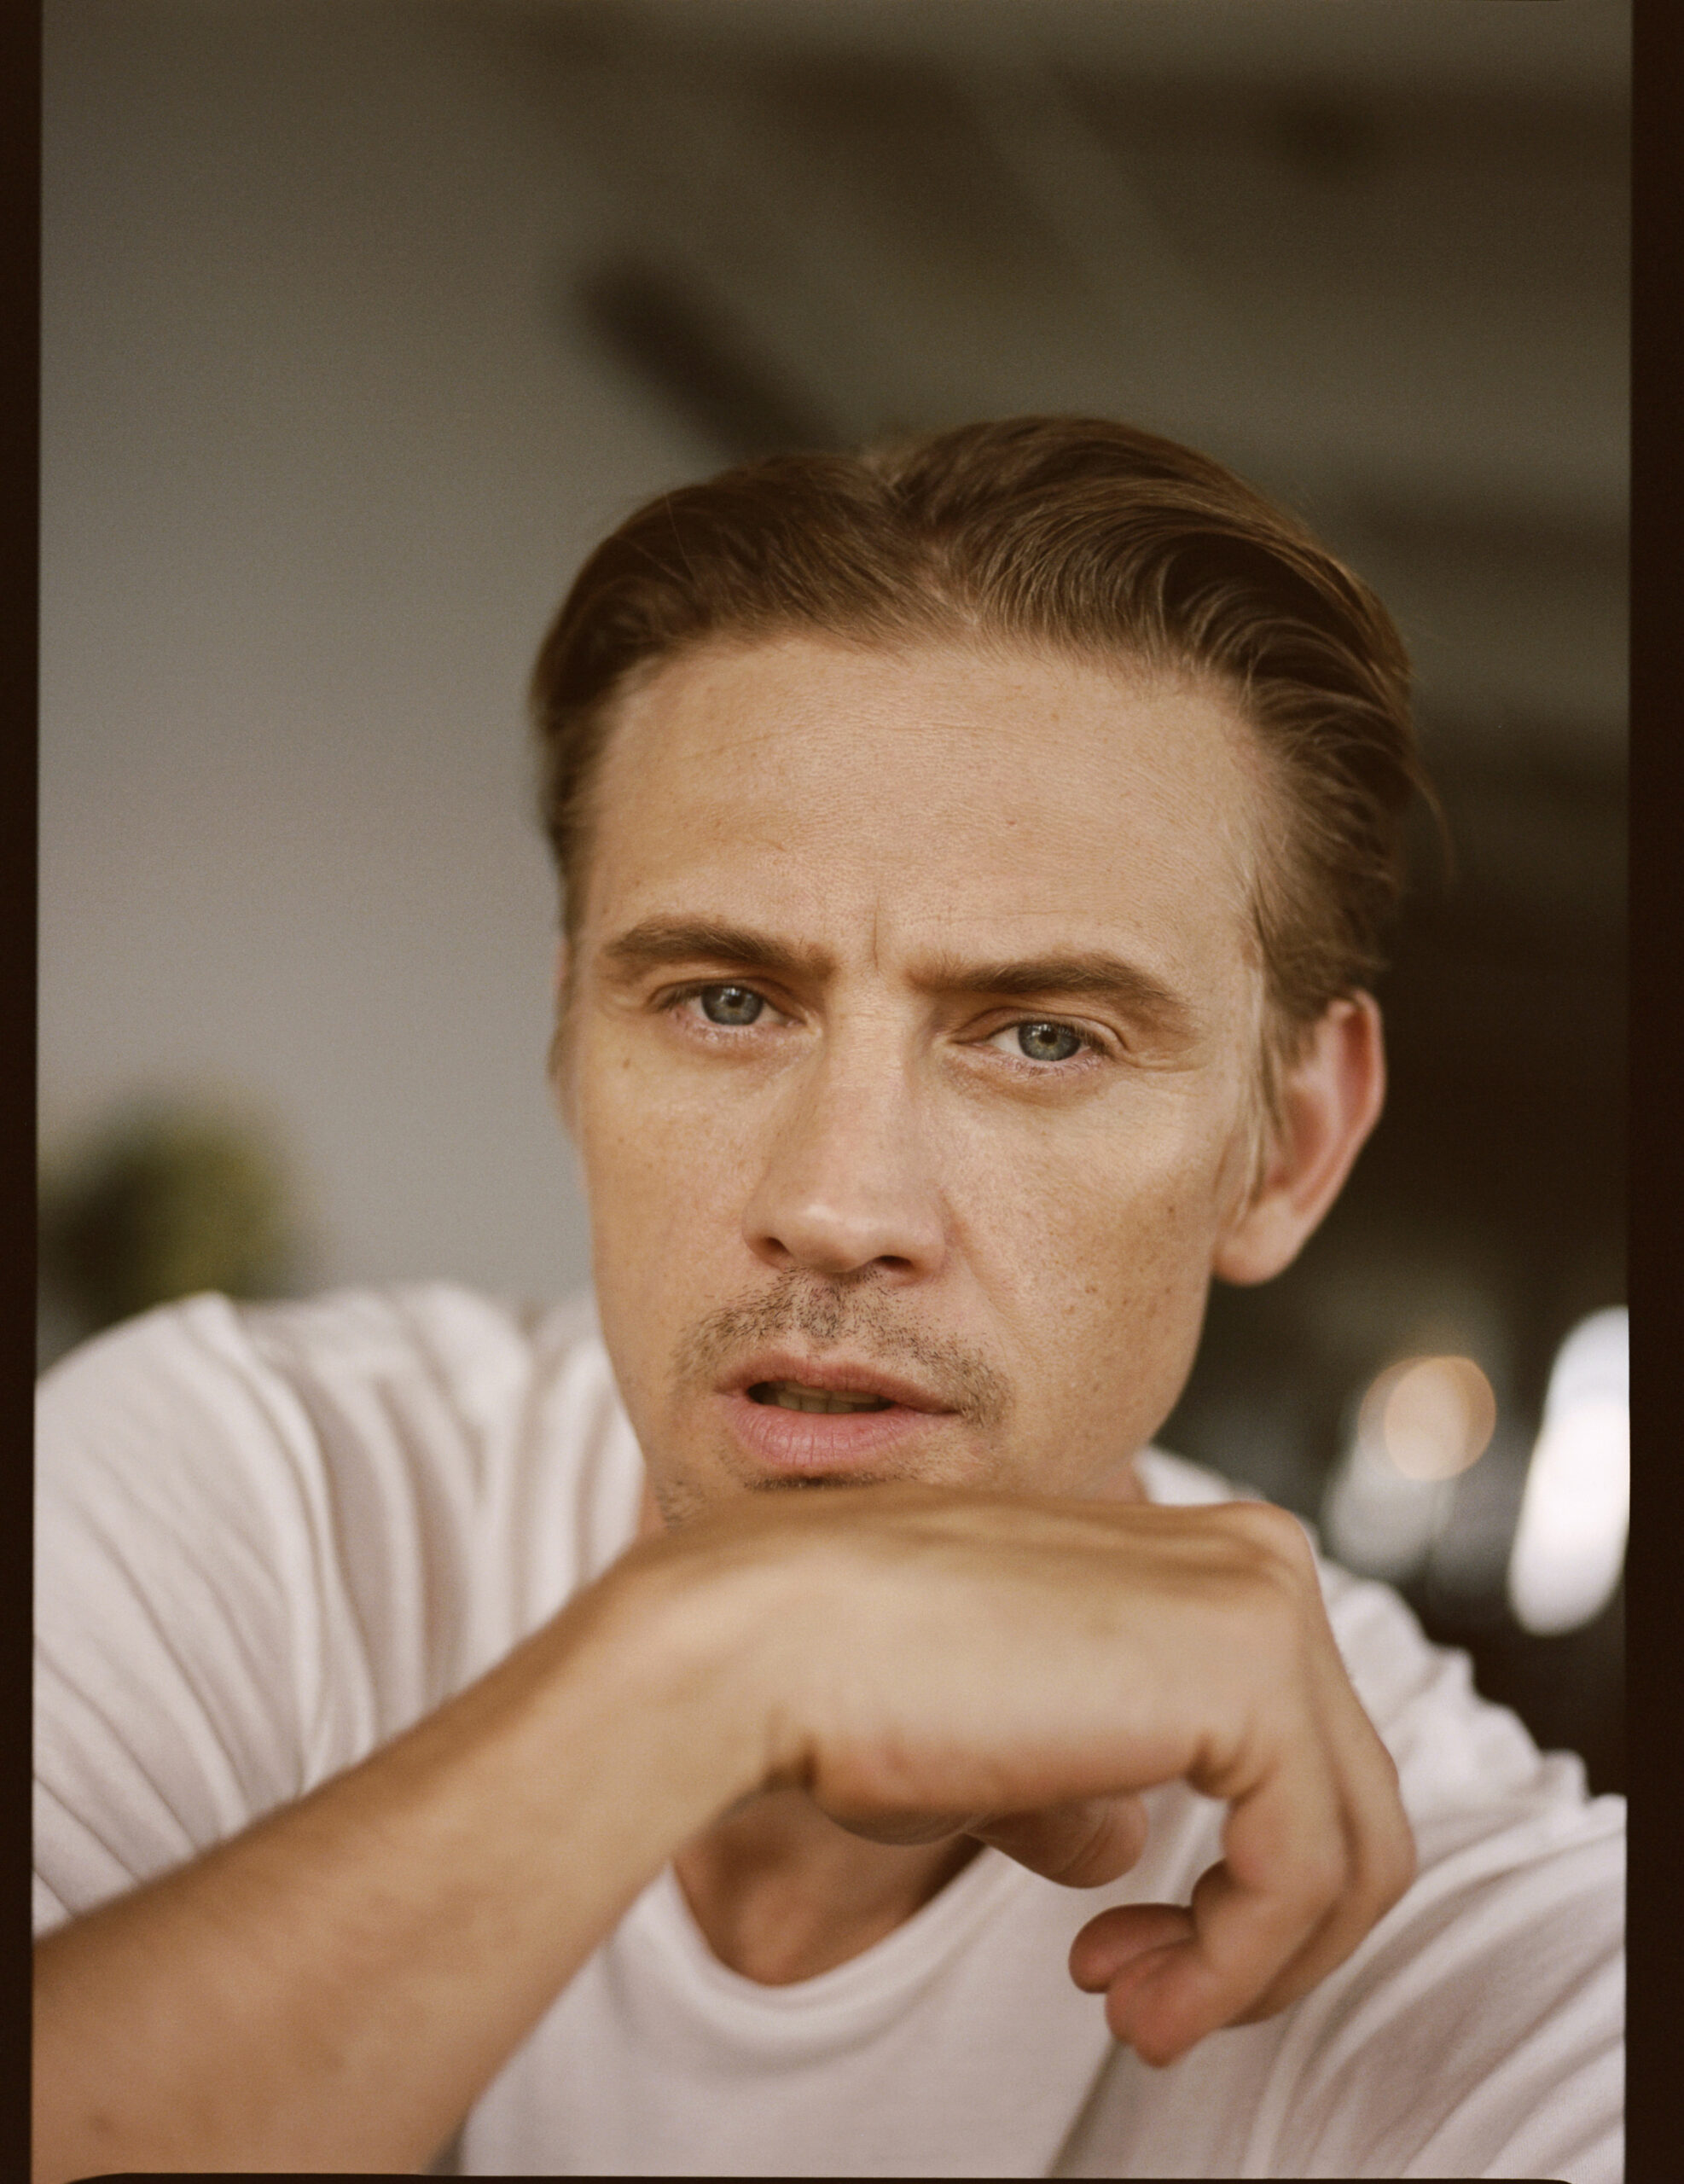 Boyd Holbrook and Michael Shannon Bond Over Their Kentucky Roots